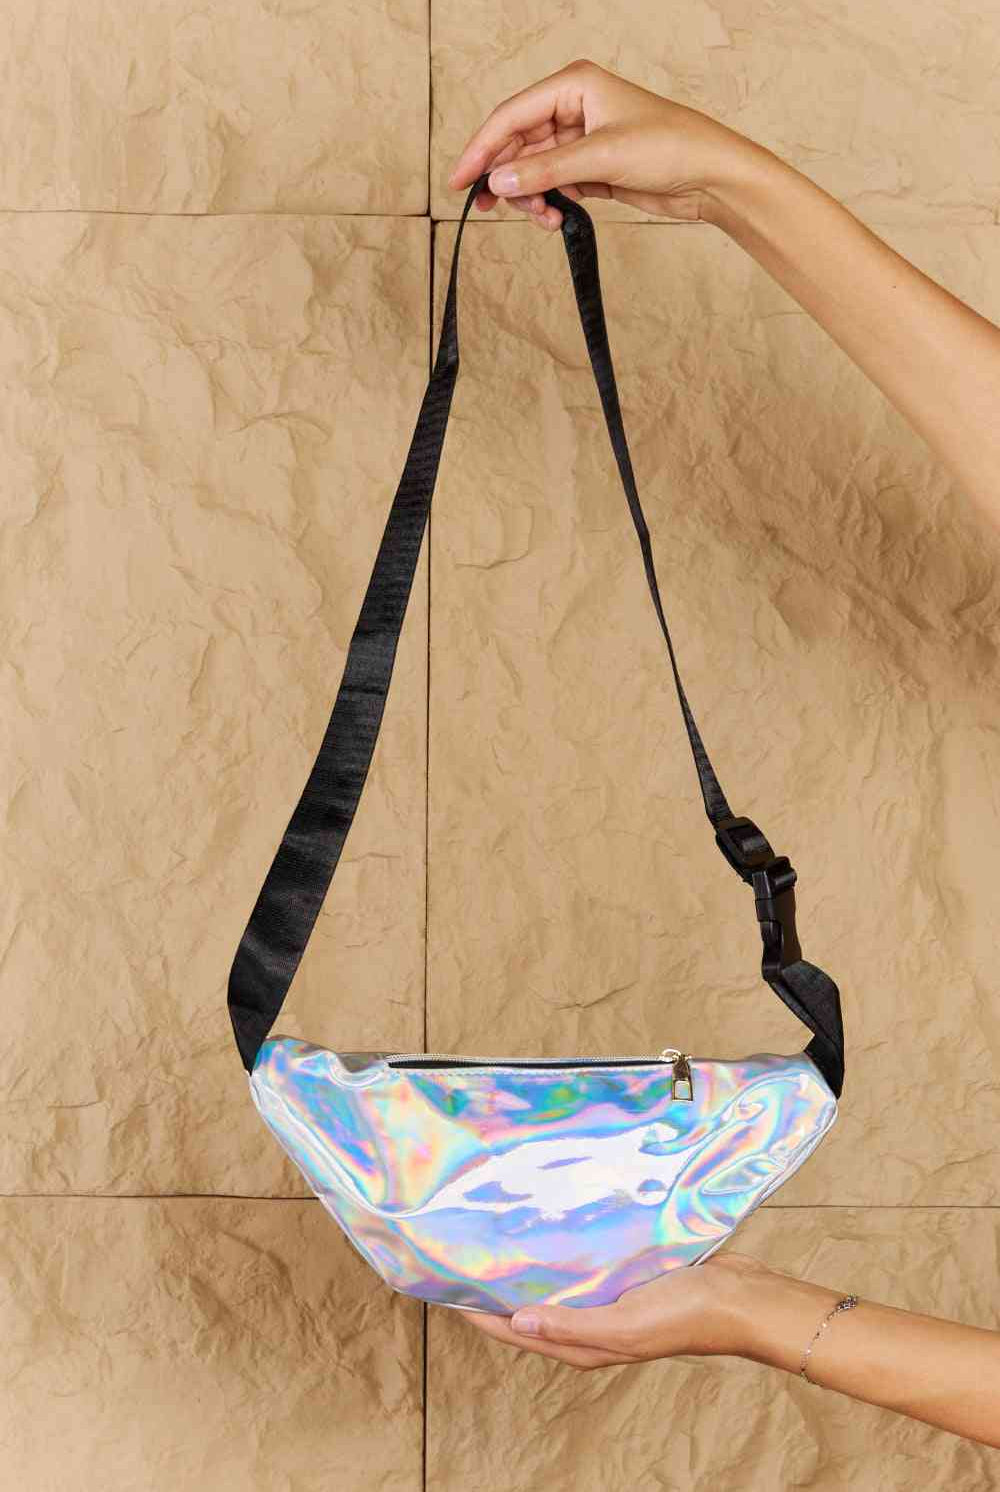 Tan Fame Good Vibrations Holographic Double Zipper Fanny Pack in Silver Clothing